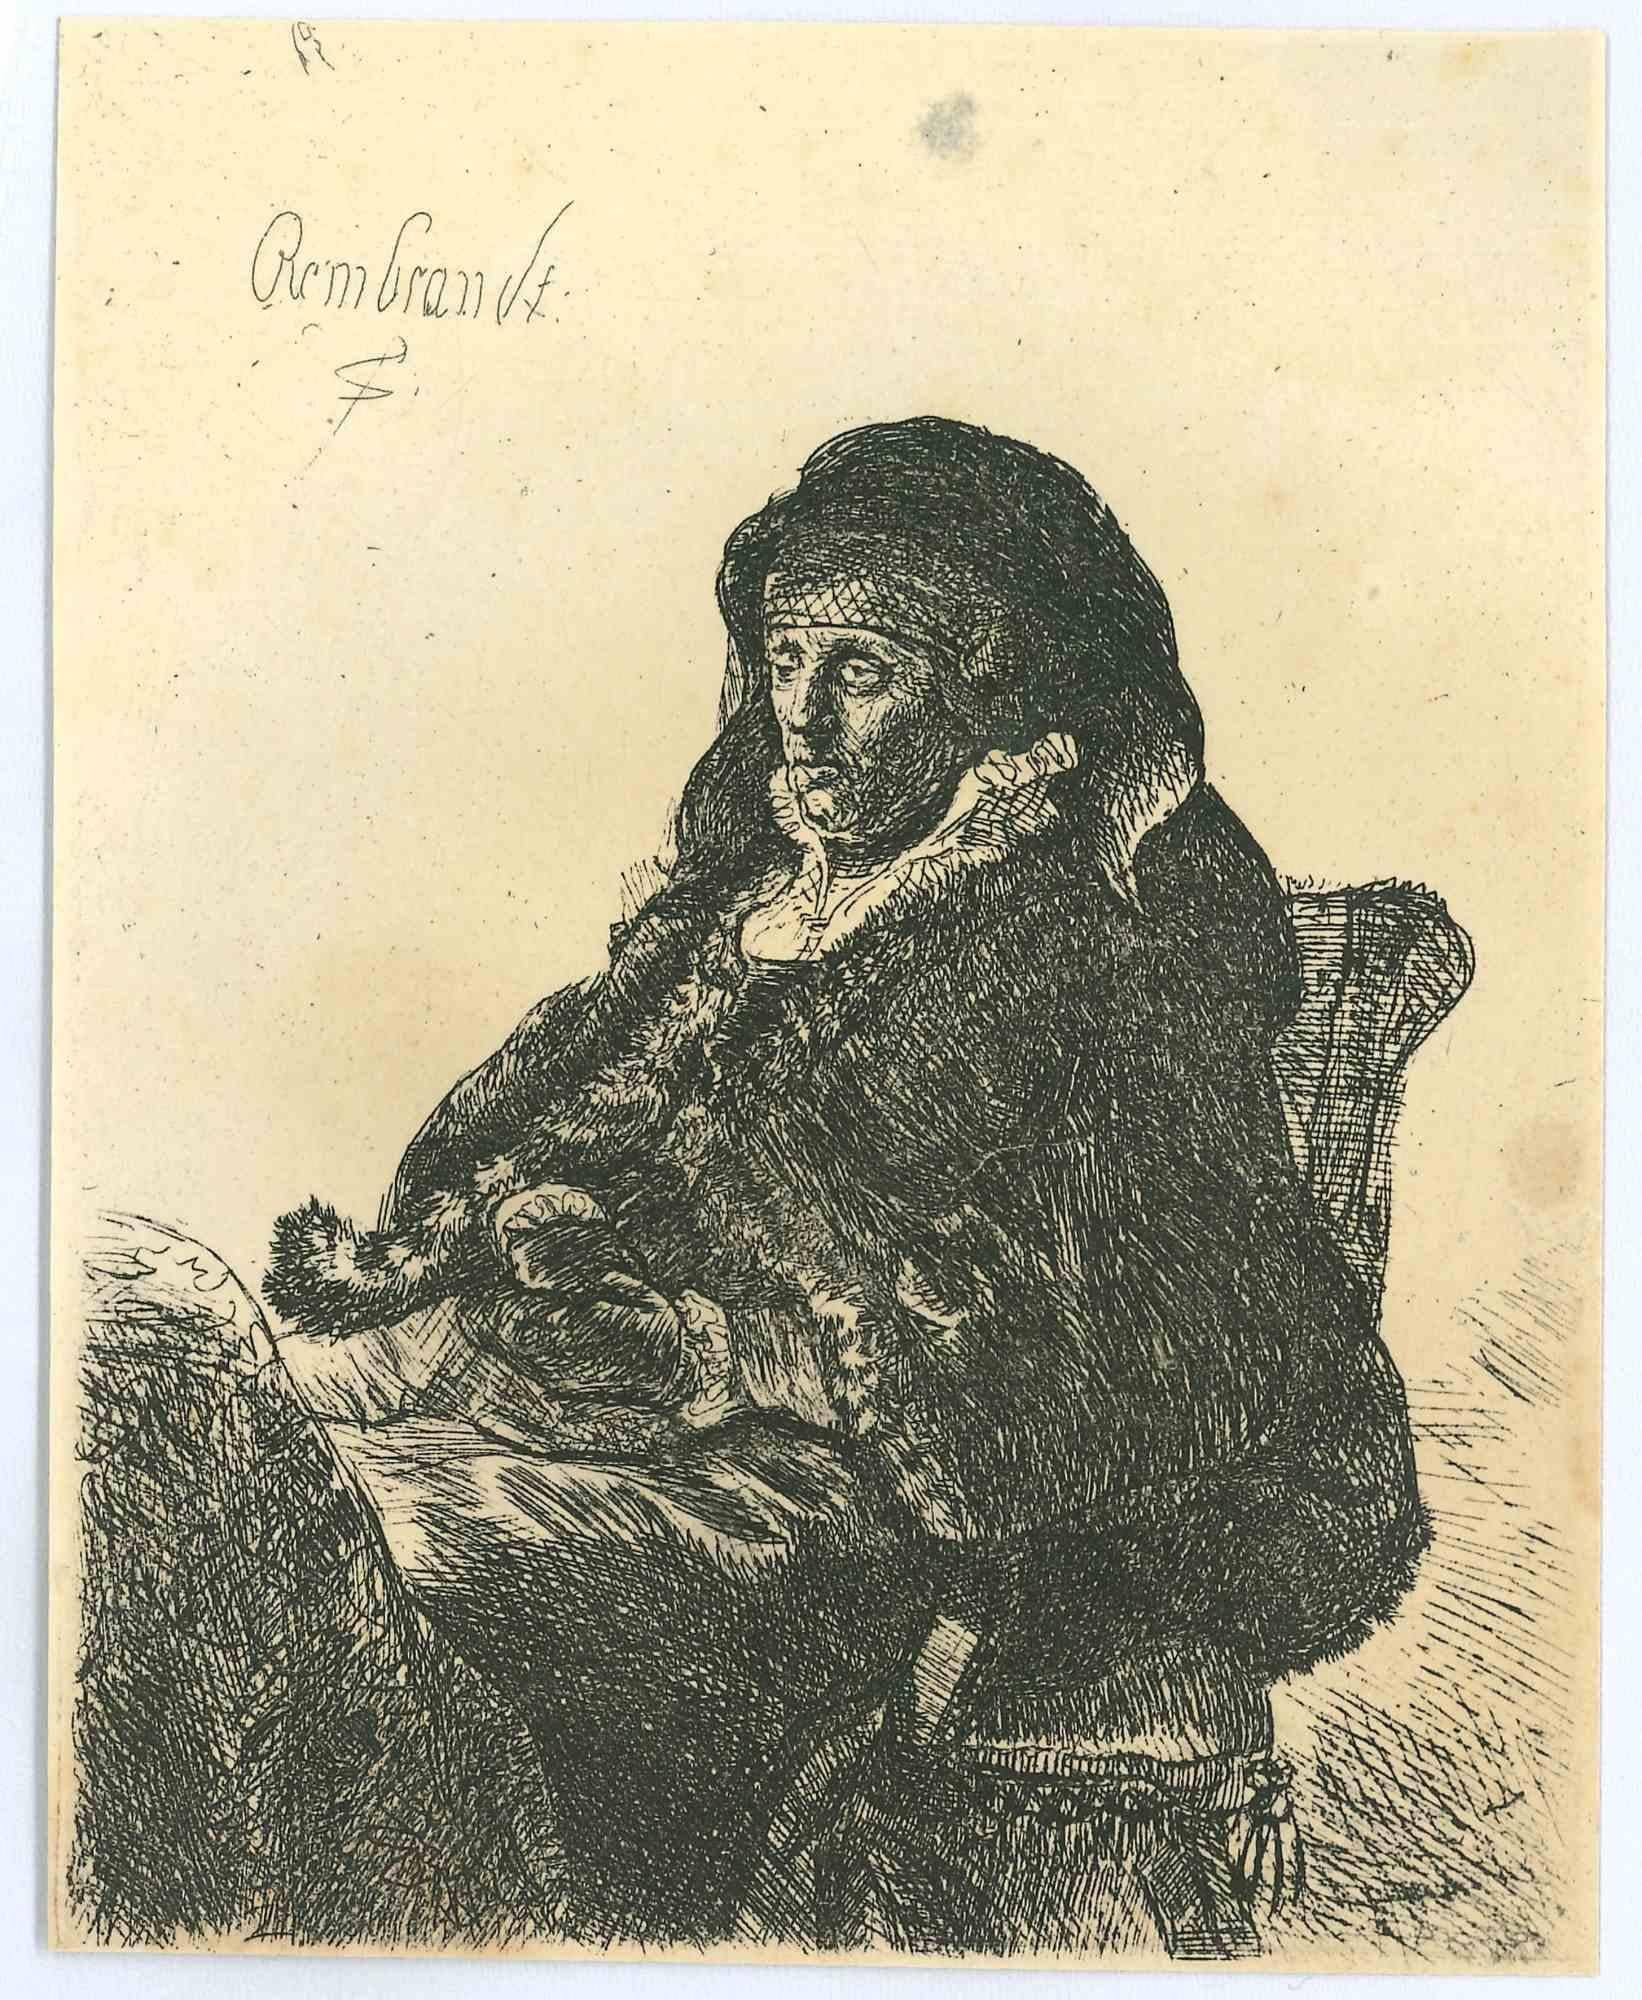 Charles Amand Durand Portrait Print - Portrait of Rembrandt's Mother - Engraving after Rembrandt - 19th century